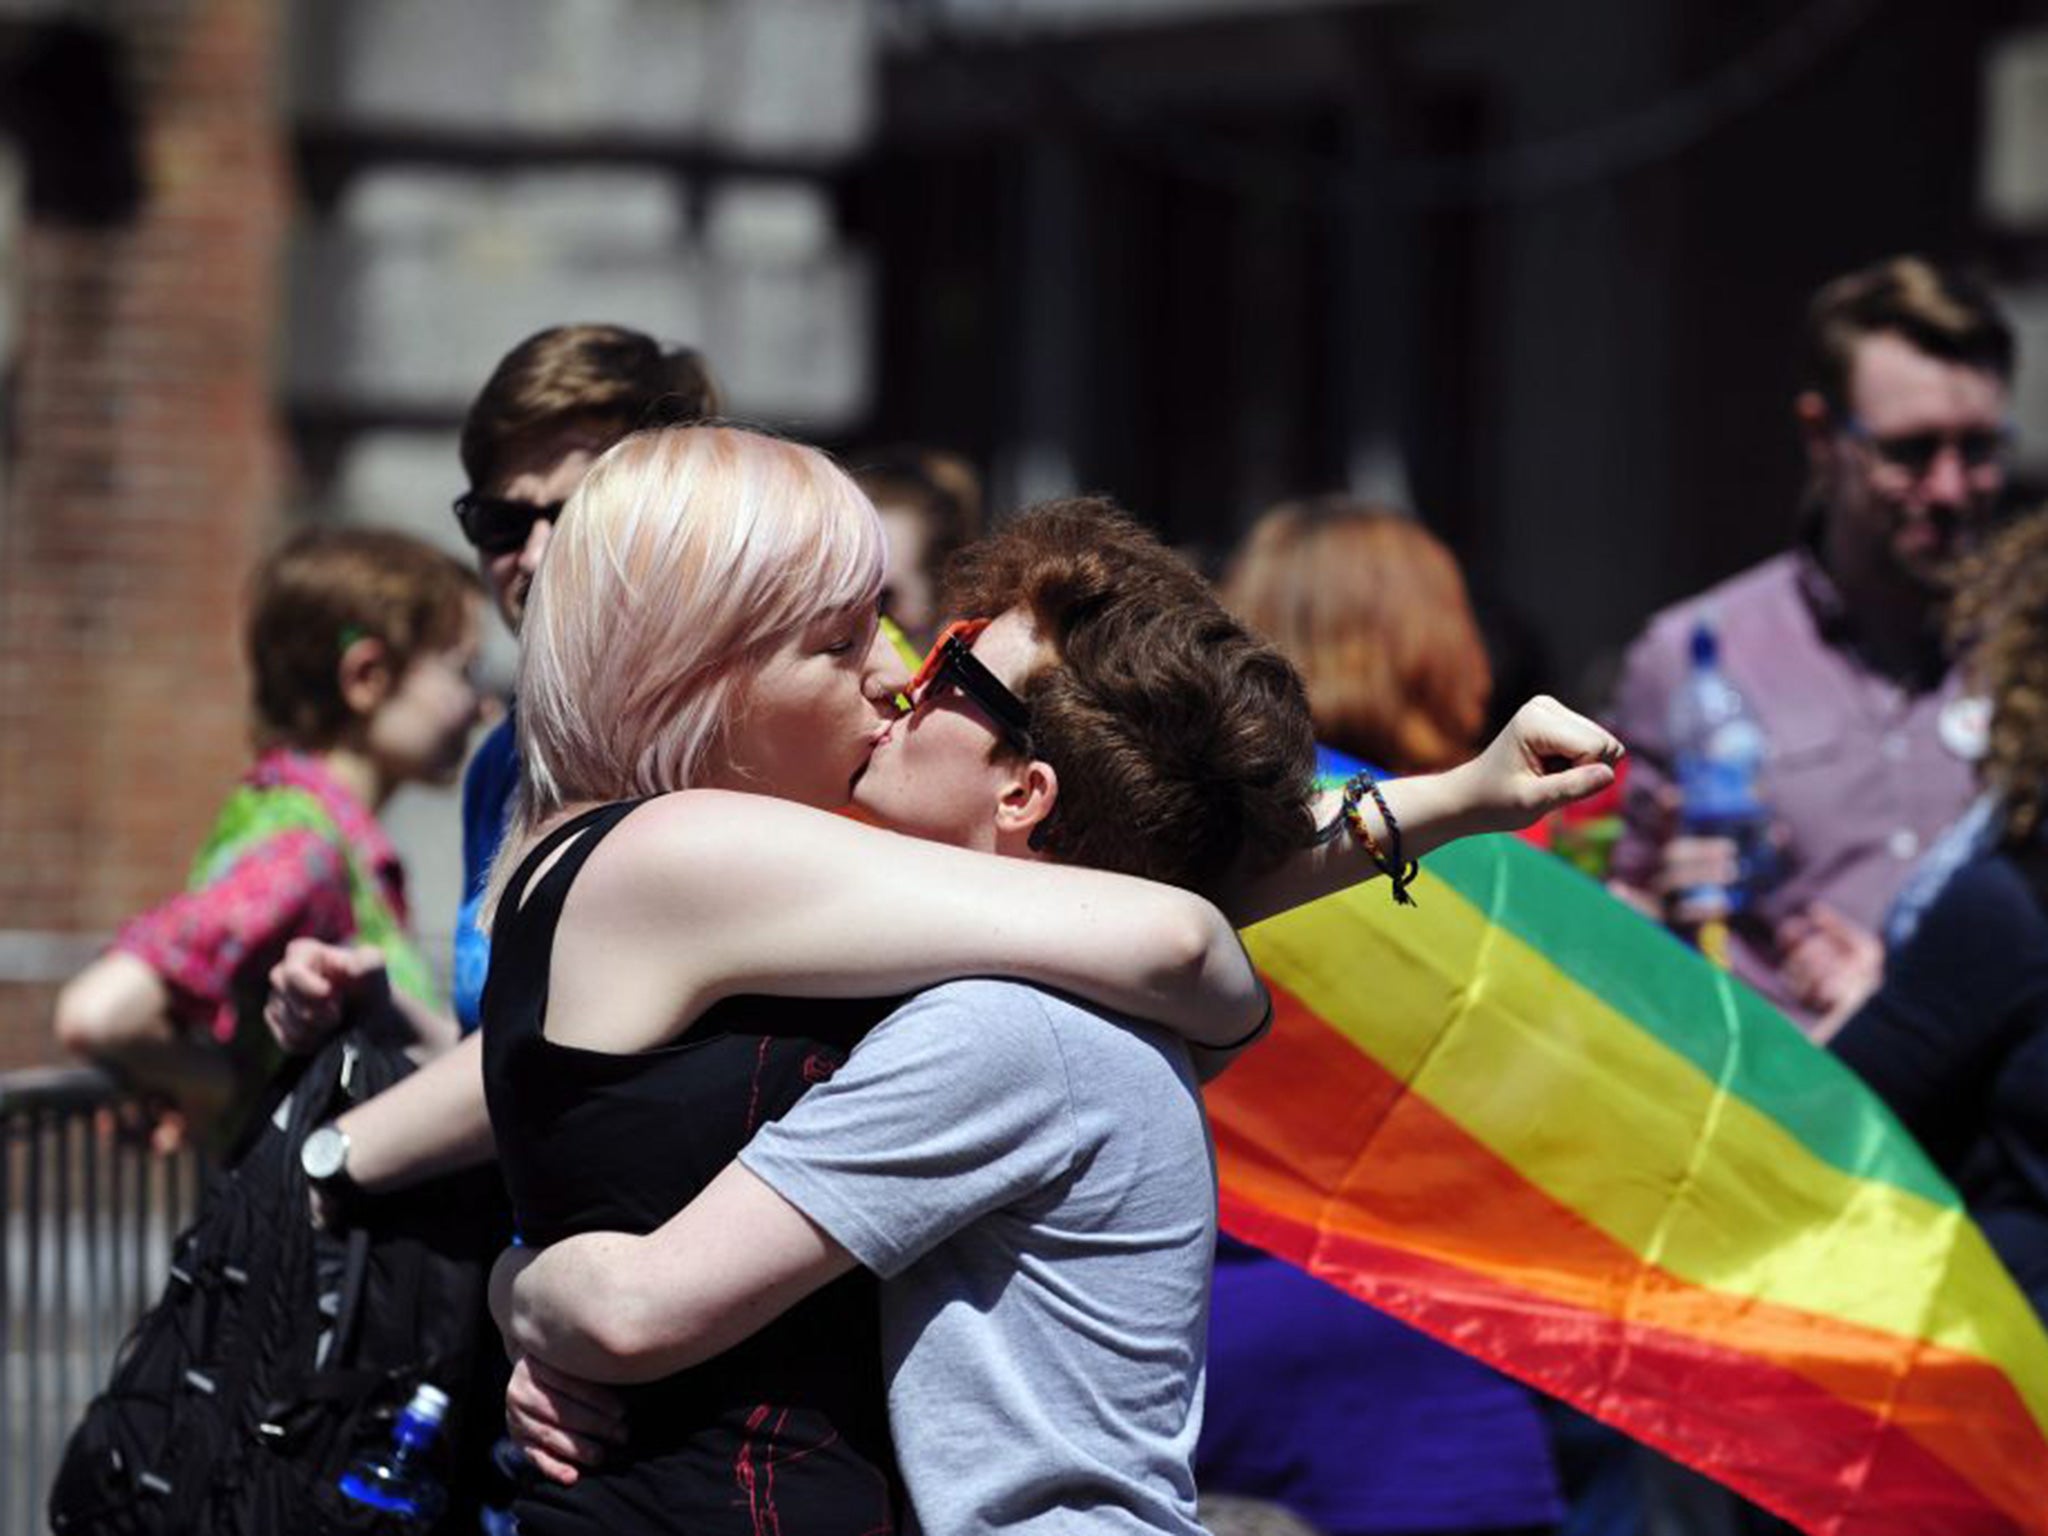 A couple kiss after early results suggest an overwhelming majority in favour of the referendum on same-sex marriage, in Dublin, Ireland, 23 May 2015